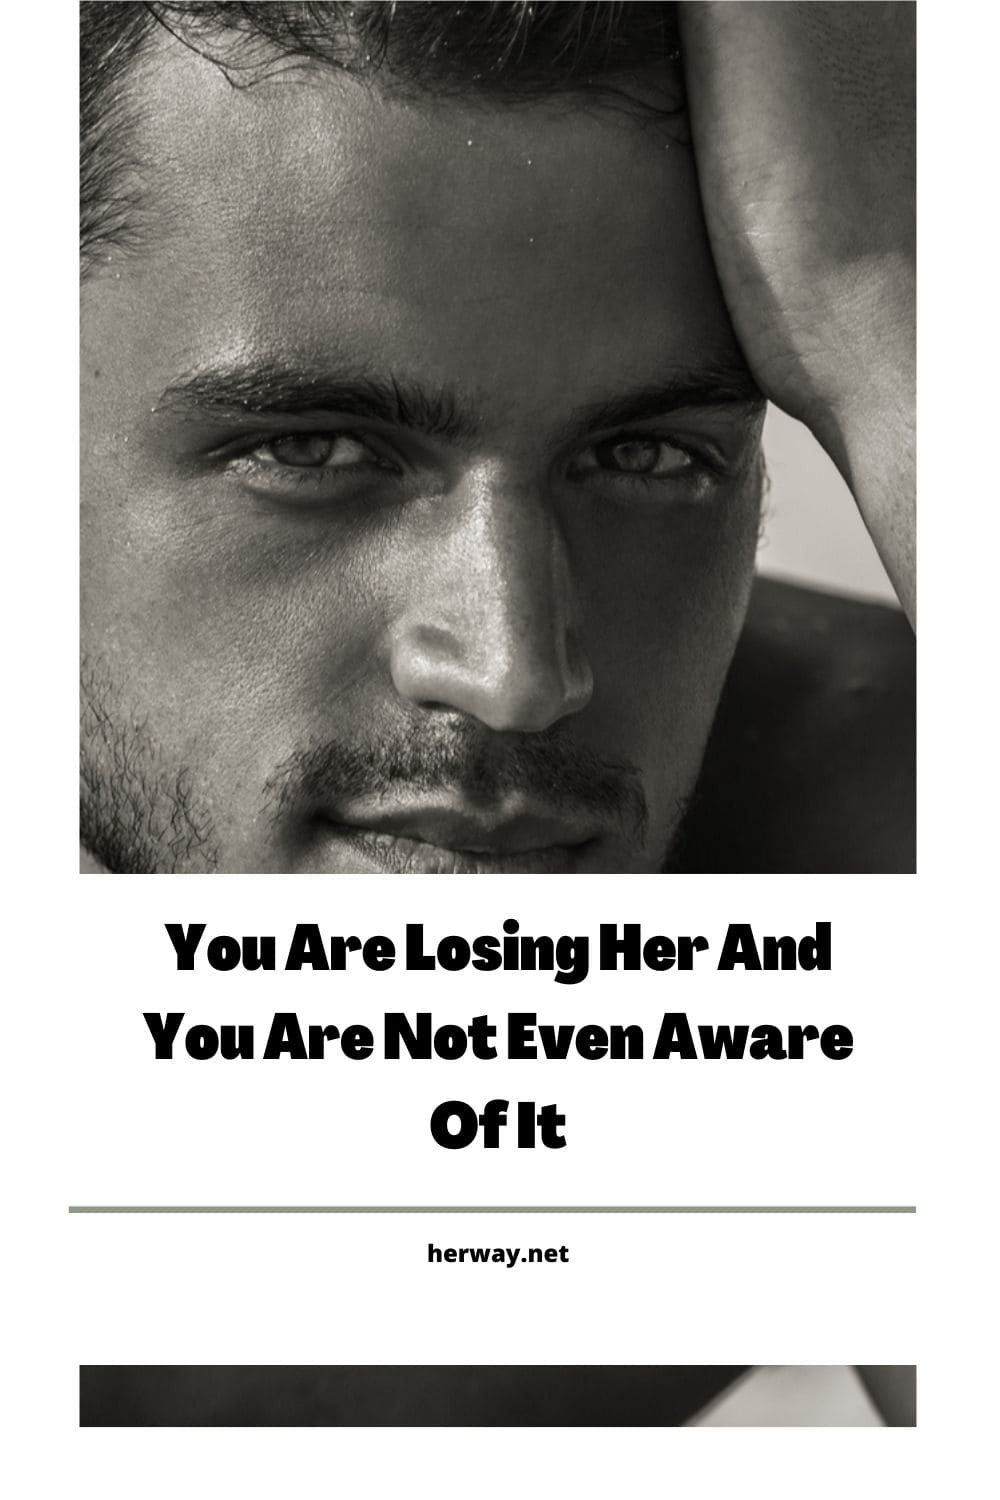 You Are Losing Her And You Are Not Even Aware Of It